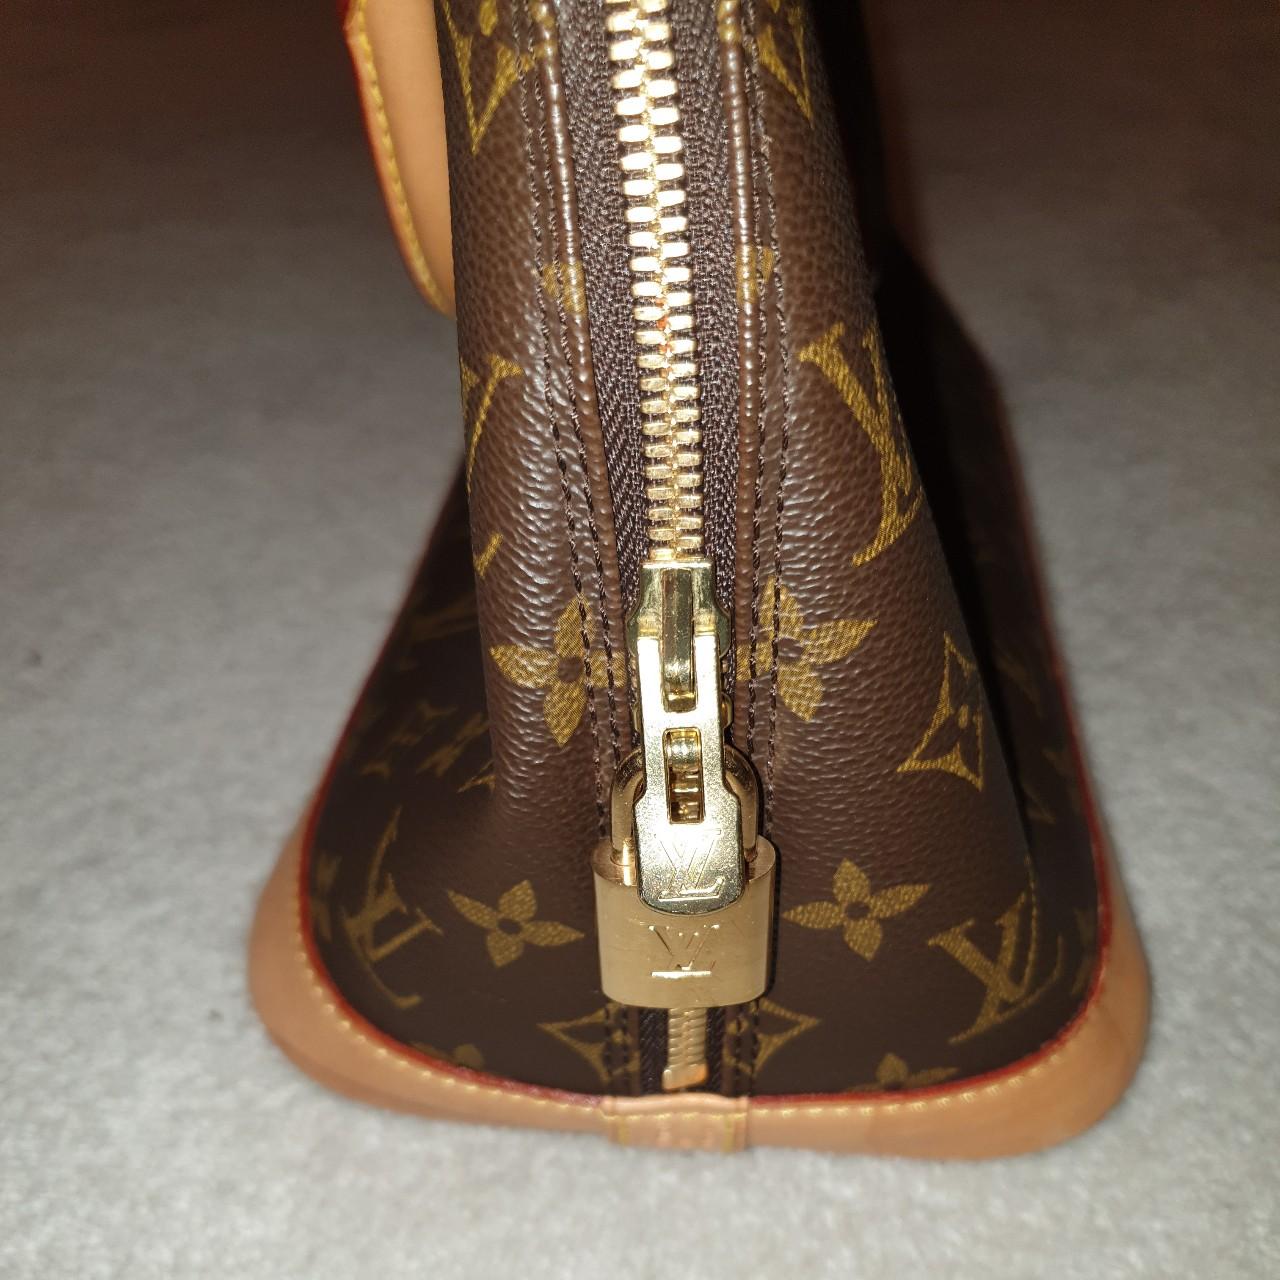 Vintage Louis Vuitton handbag from the early 2000s. - Depop